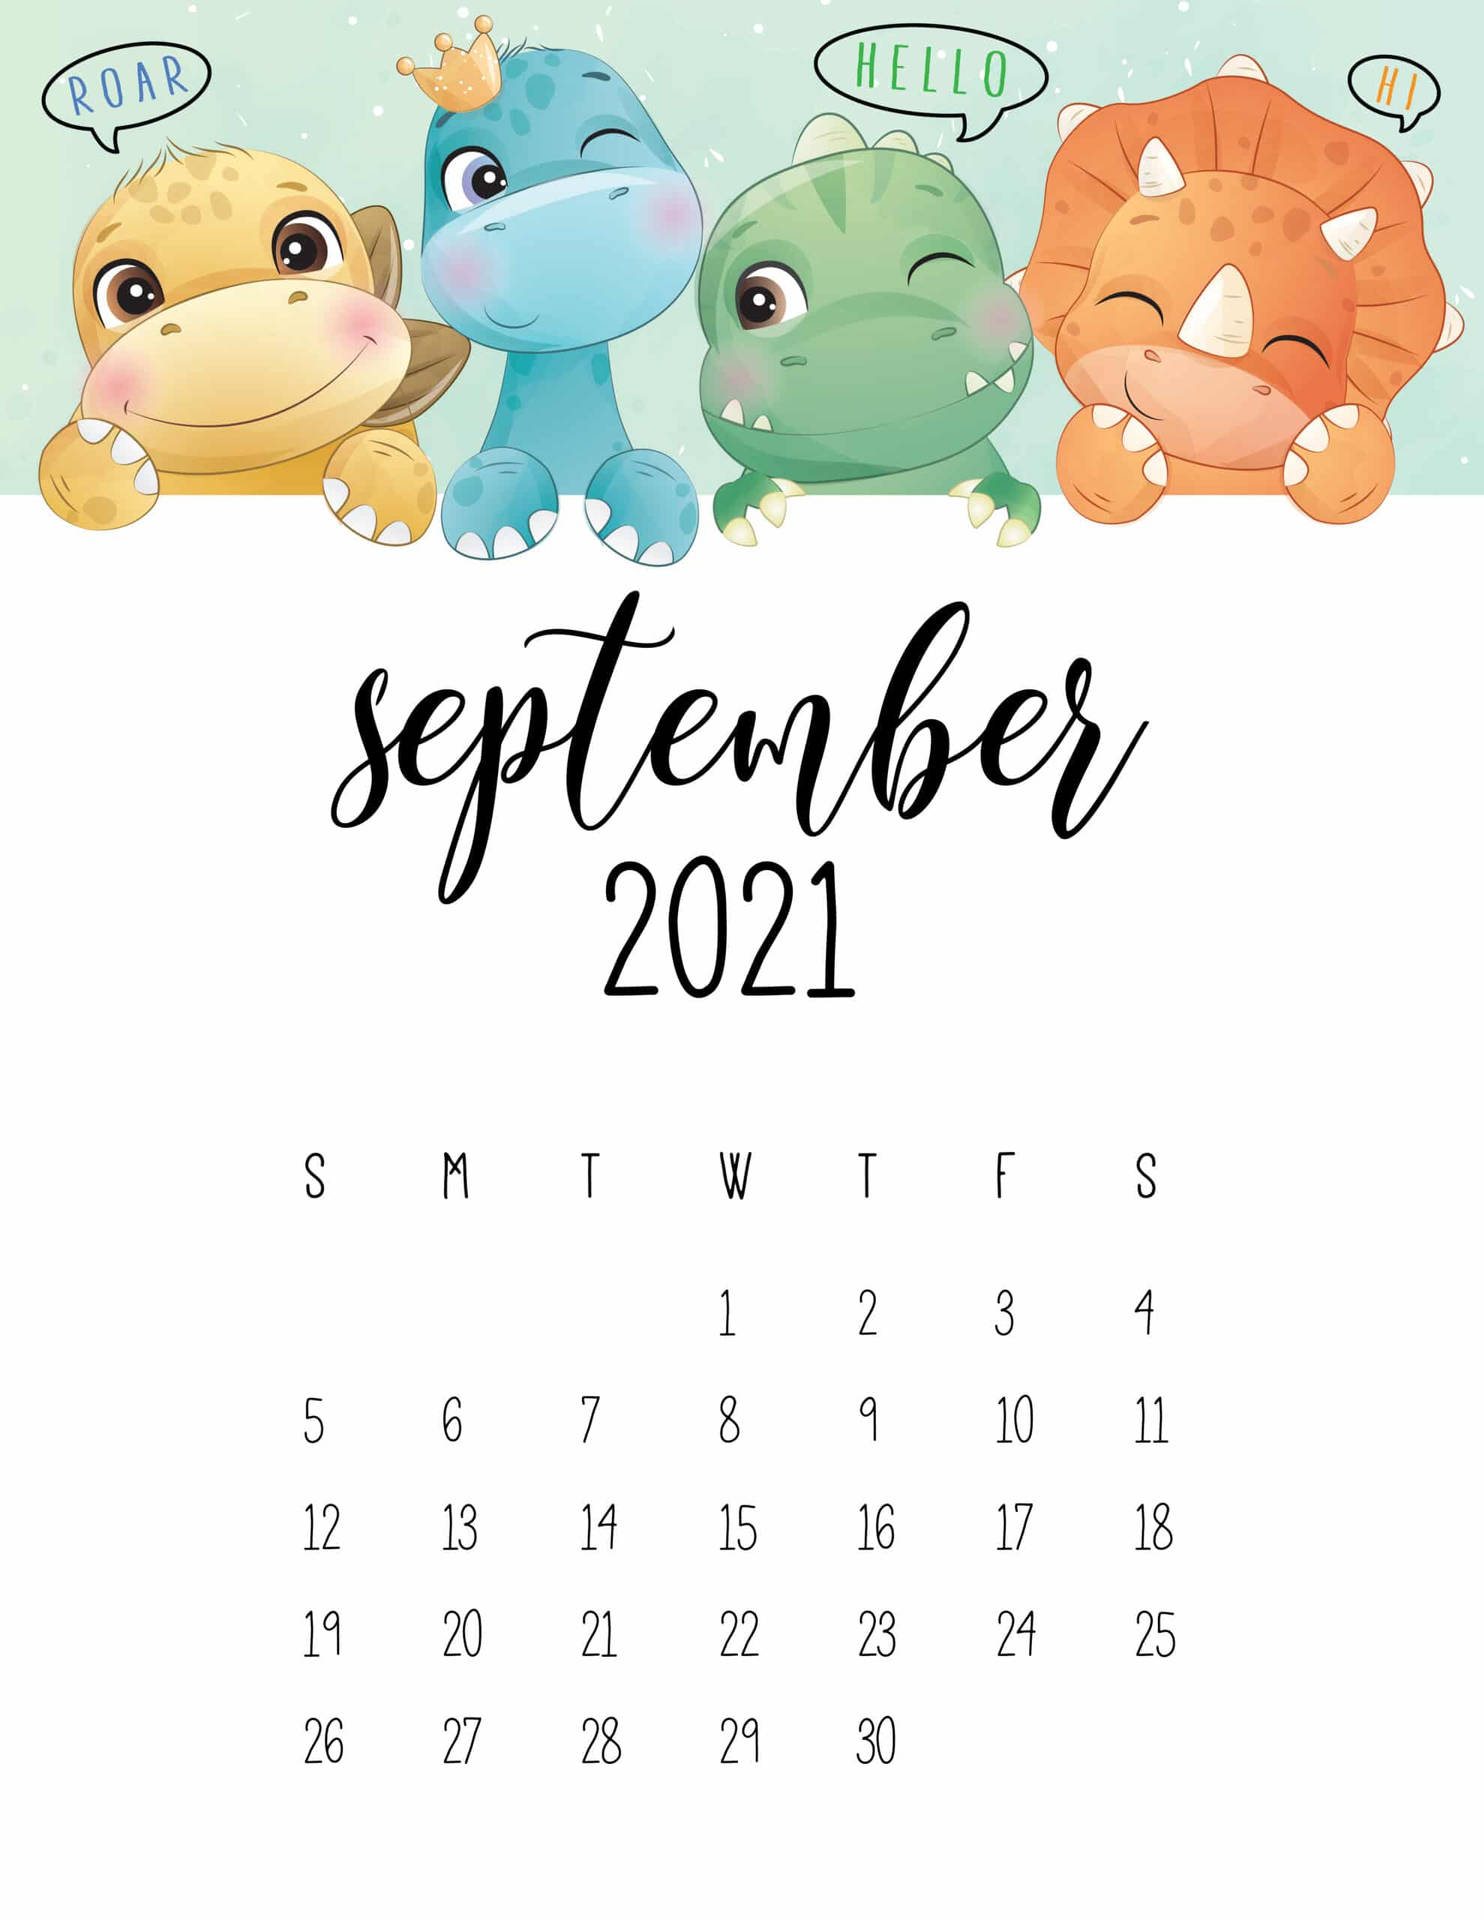 Get Ready for Something Big this September Wallpaper